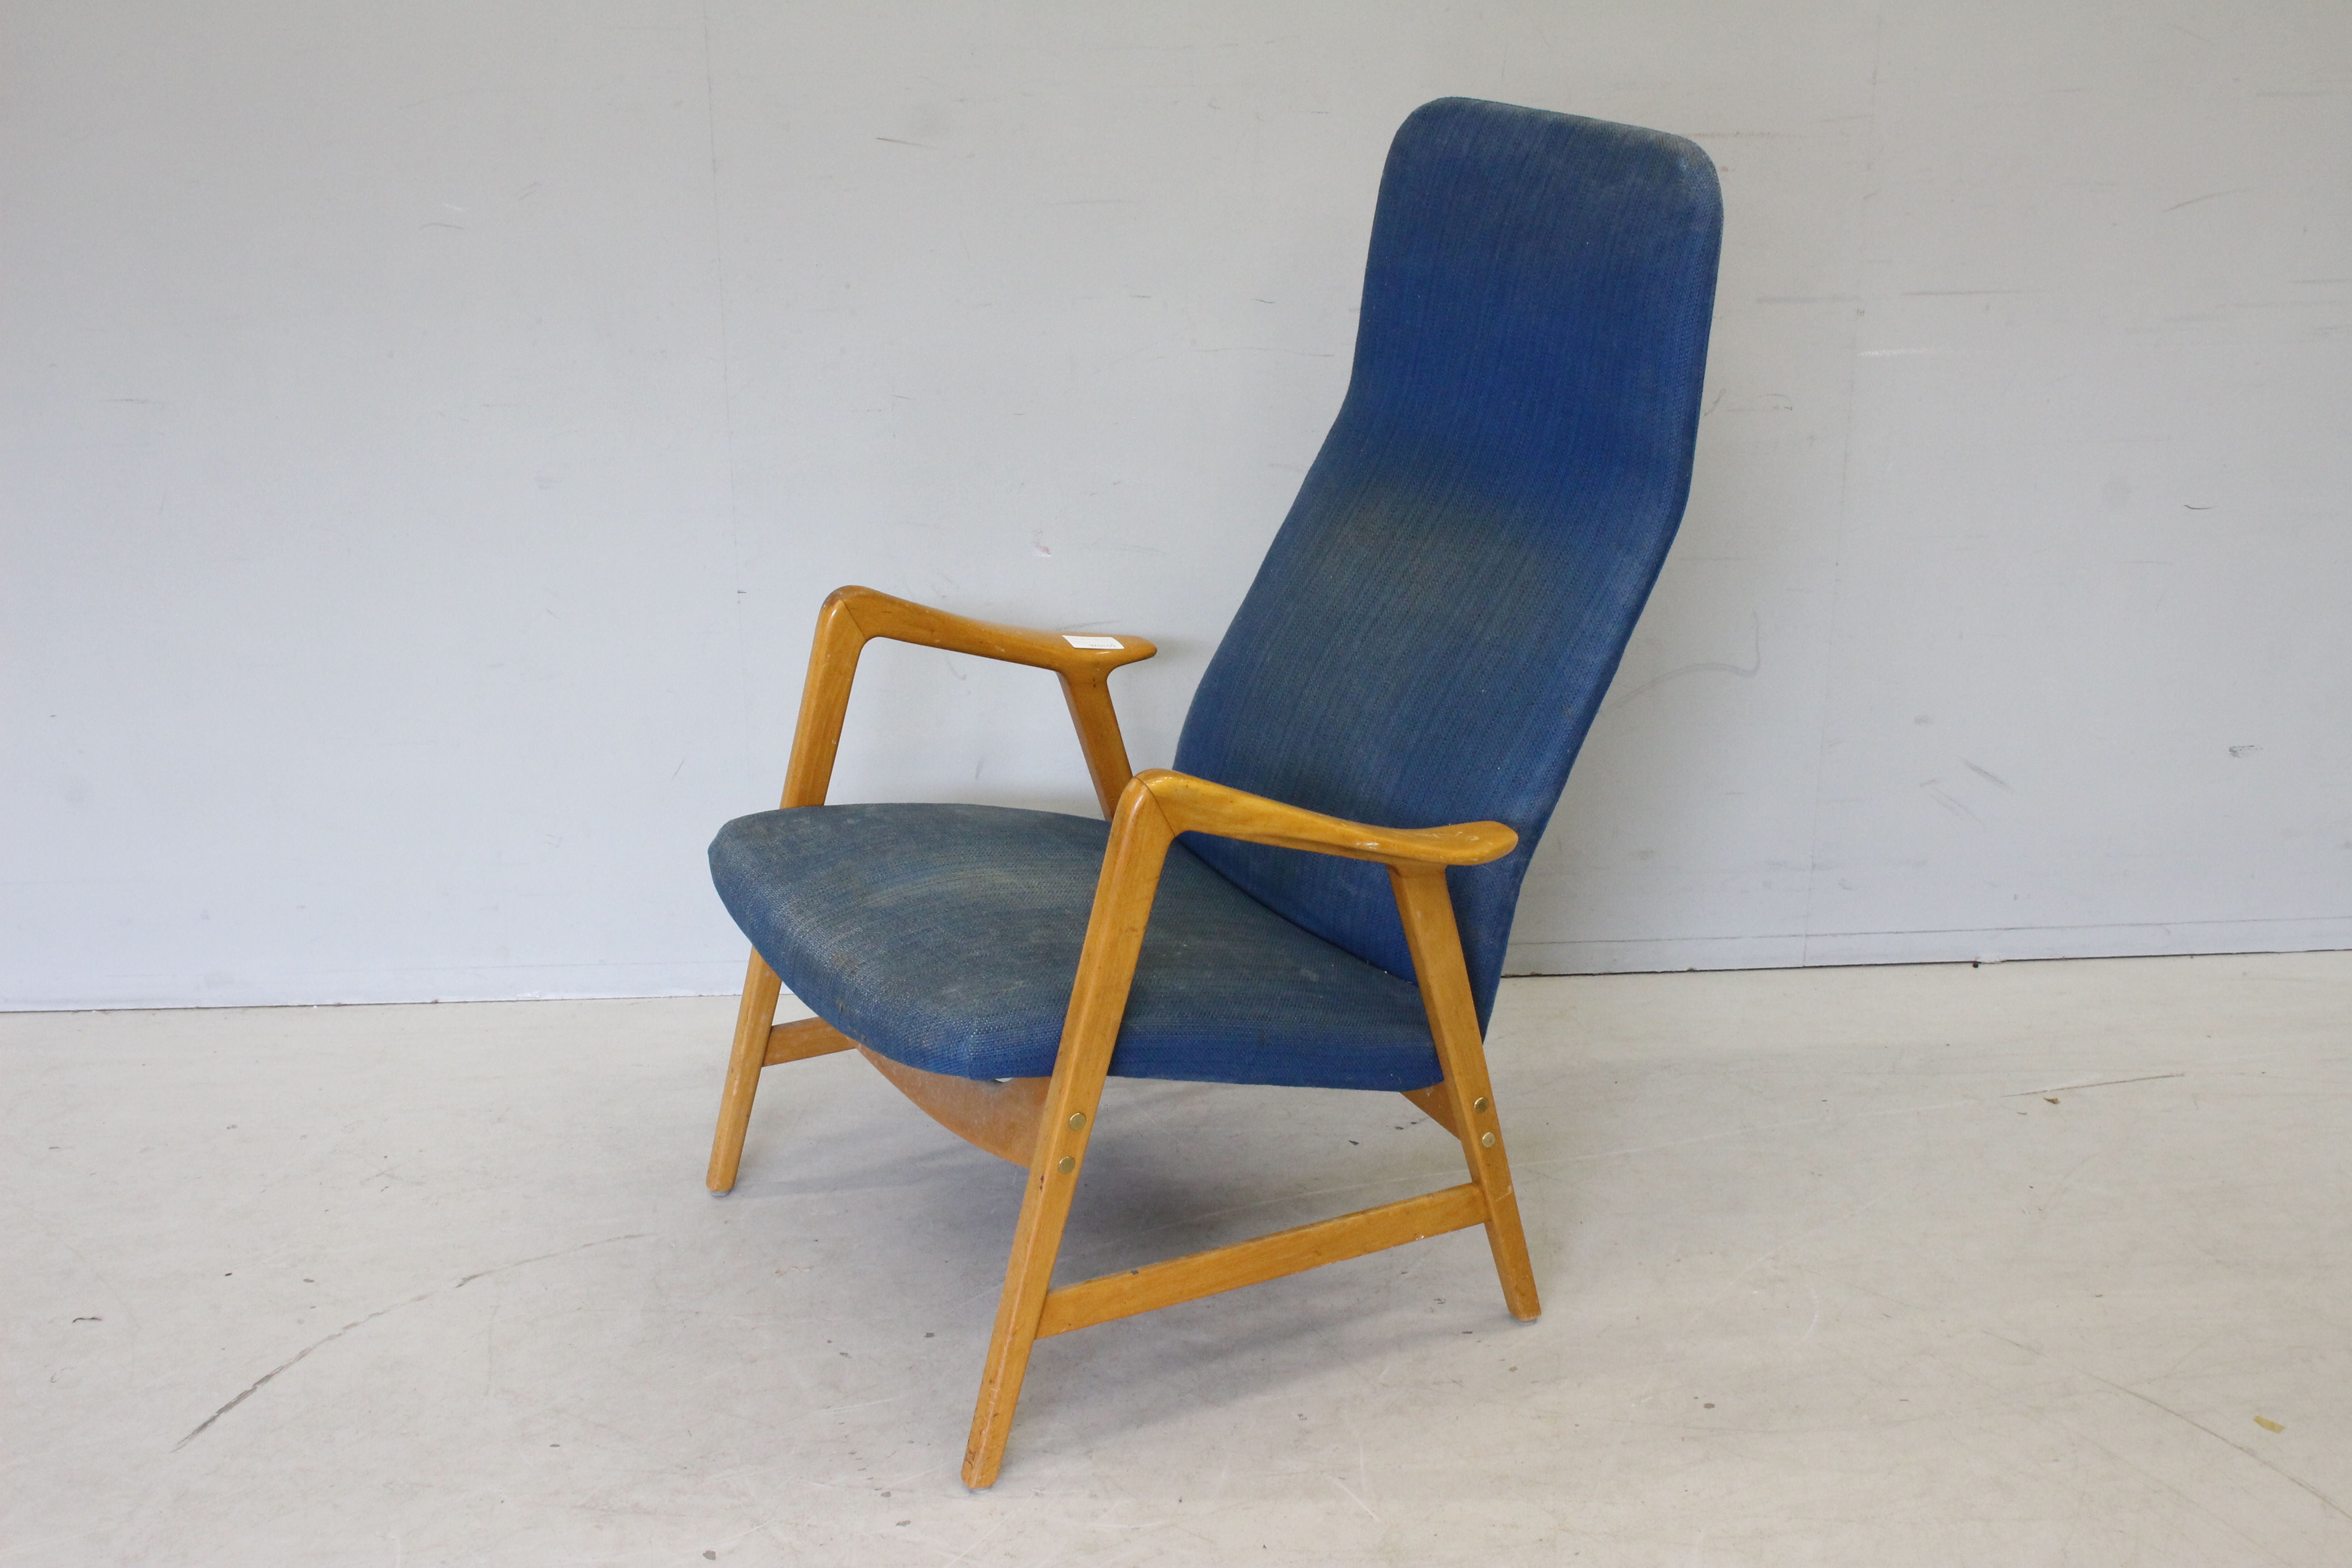 Studio Ljungs Industrier Mid Century Armchair, possibly from Alf Svensson